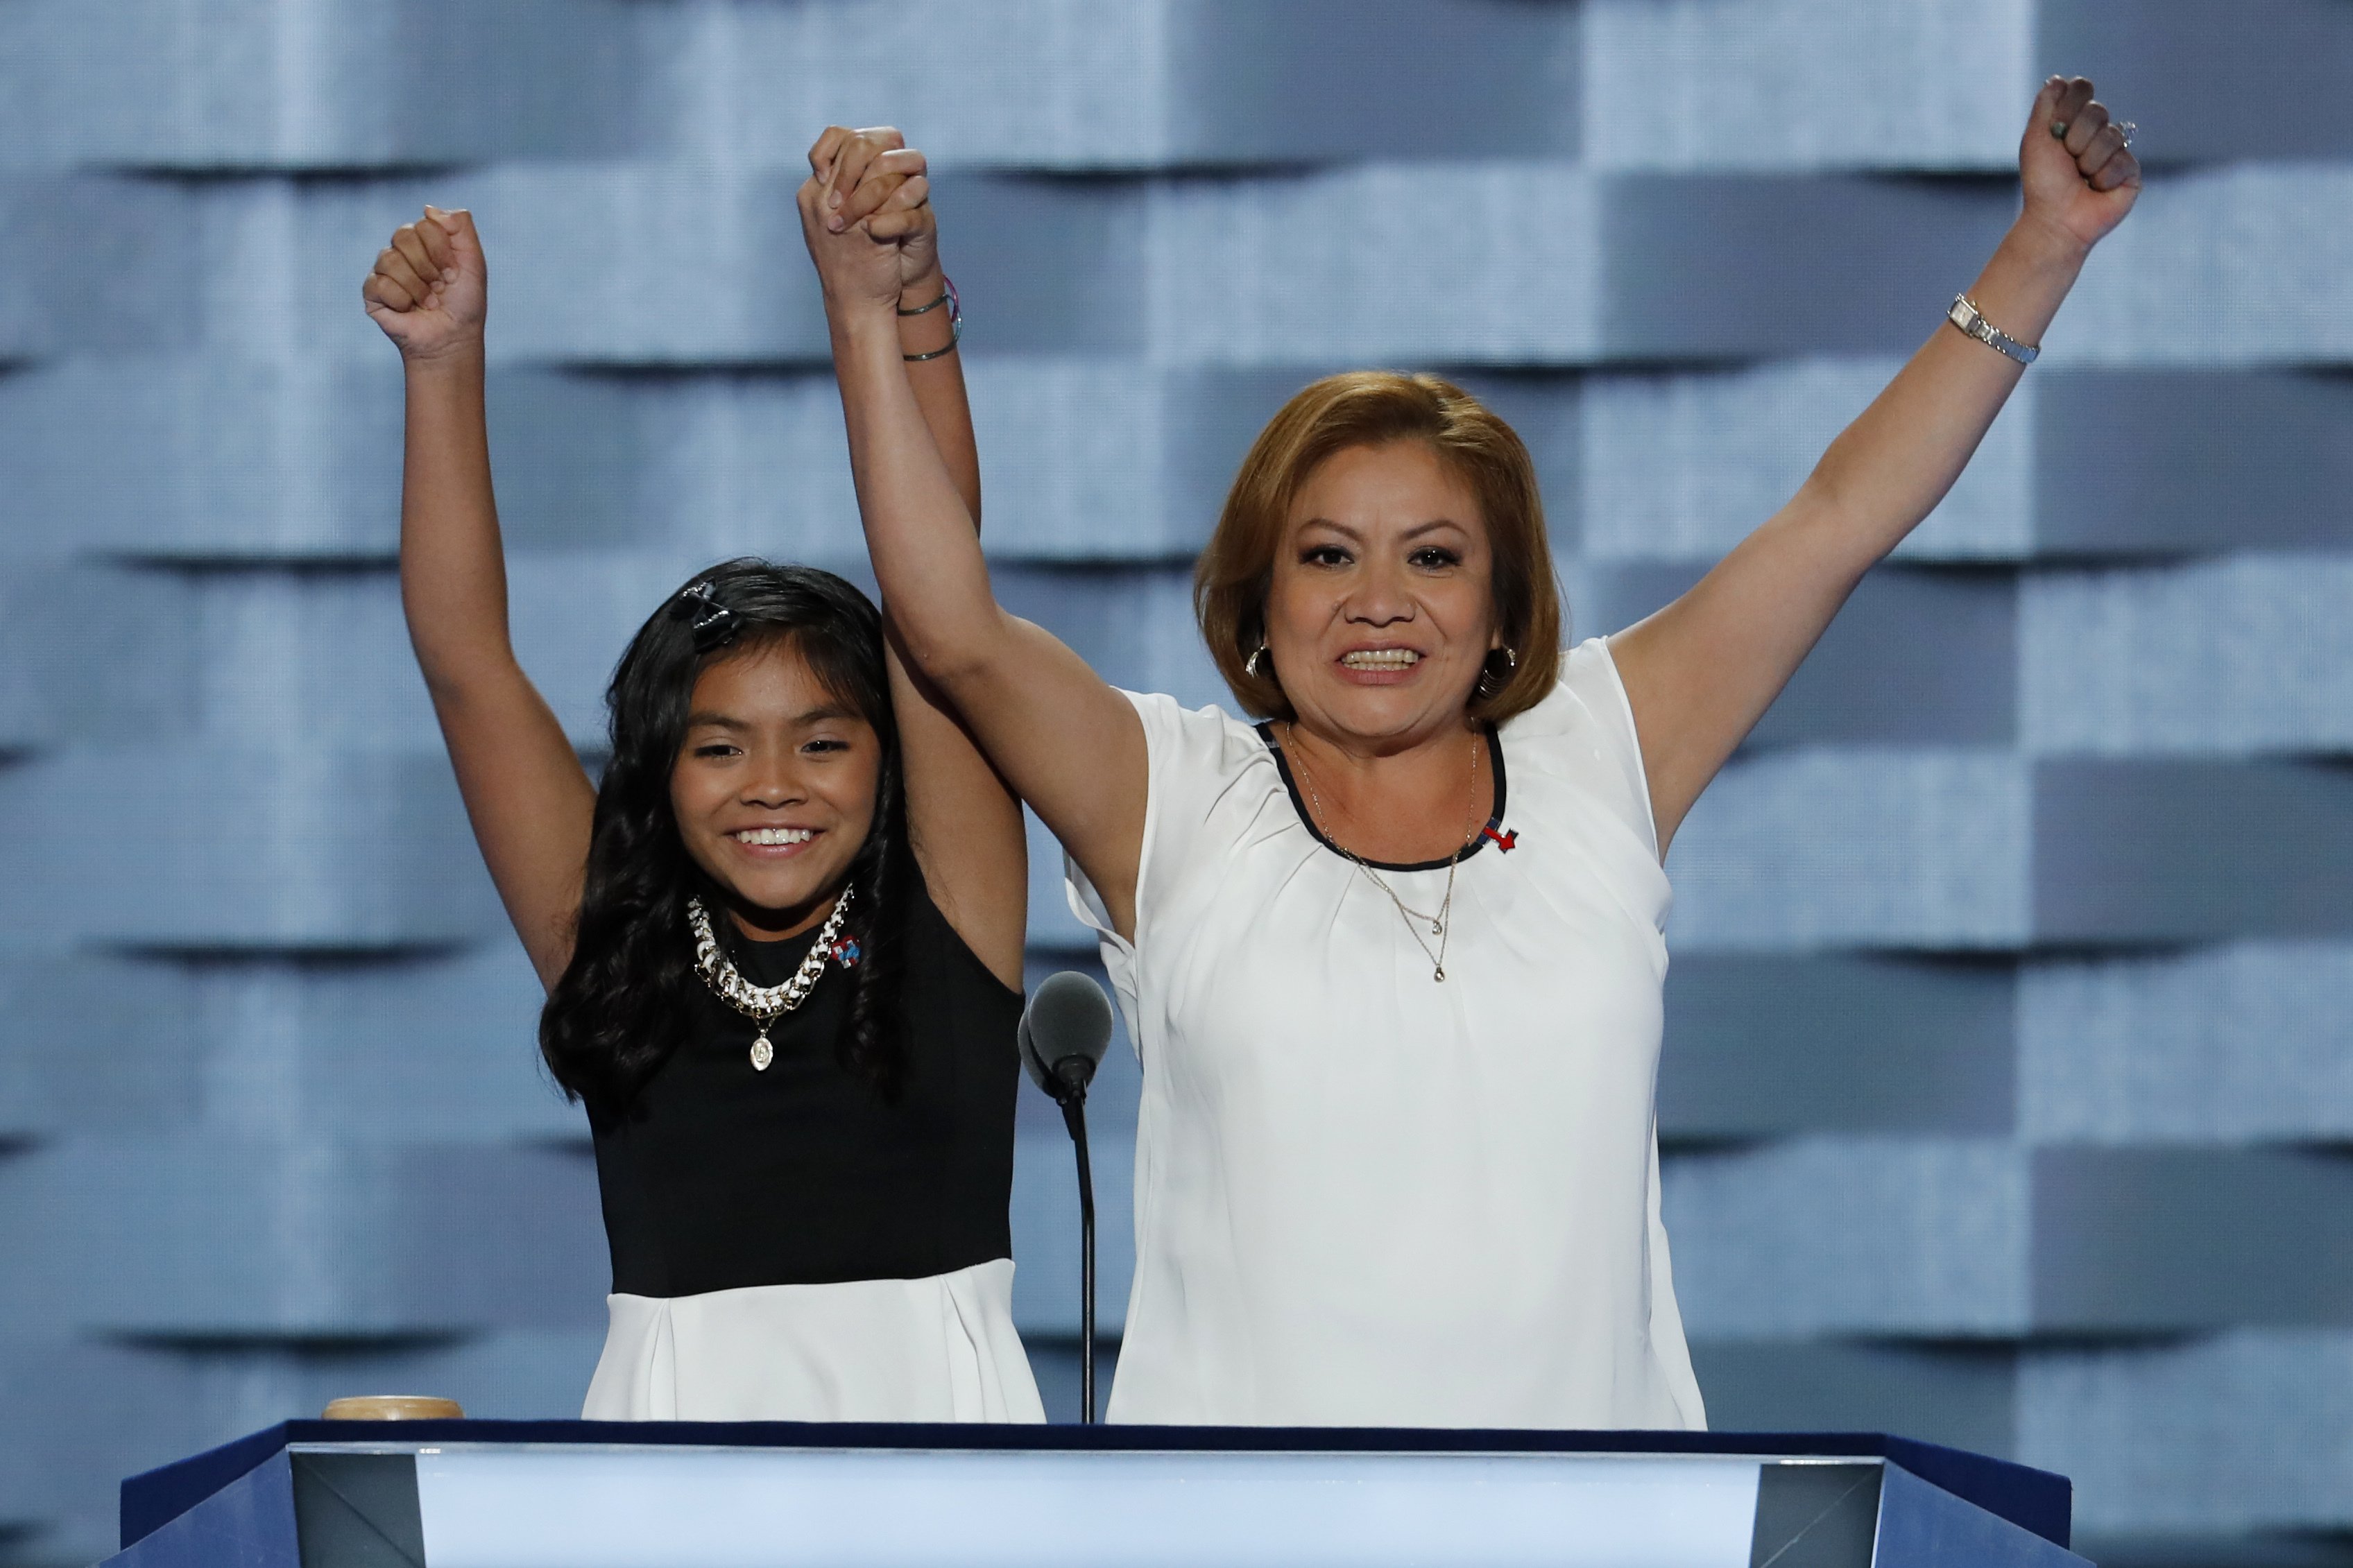 11-year-old Karla Ortiz, left, and her mother Francisca Ortiz speak during the first day of the Democratic National Convention in Philadelphia on Monday, July 25, 2016. (J. Scott Applewhite—AP)